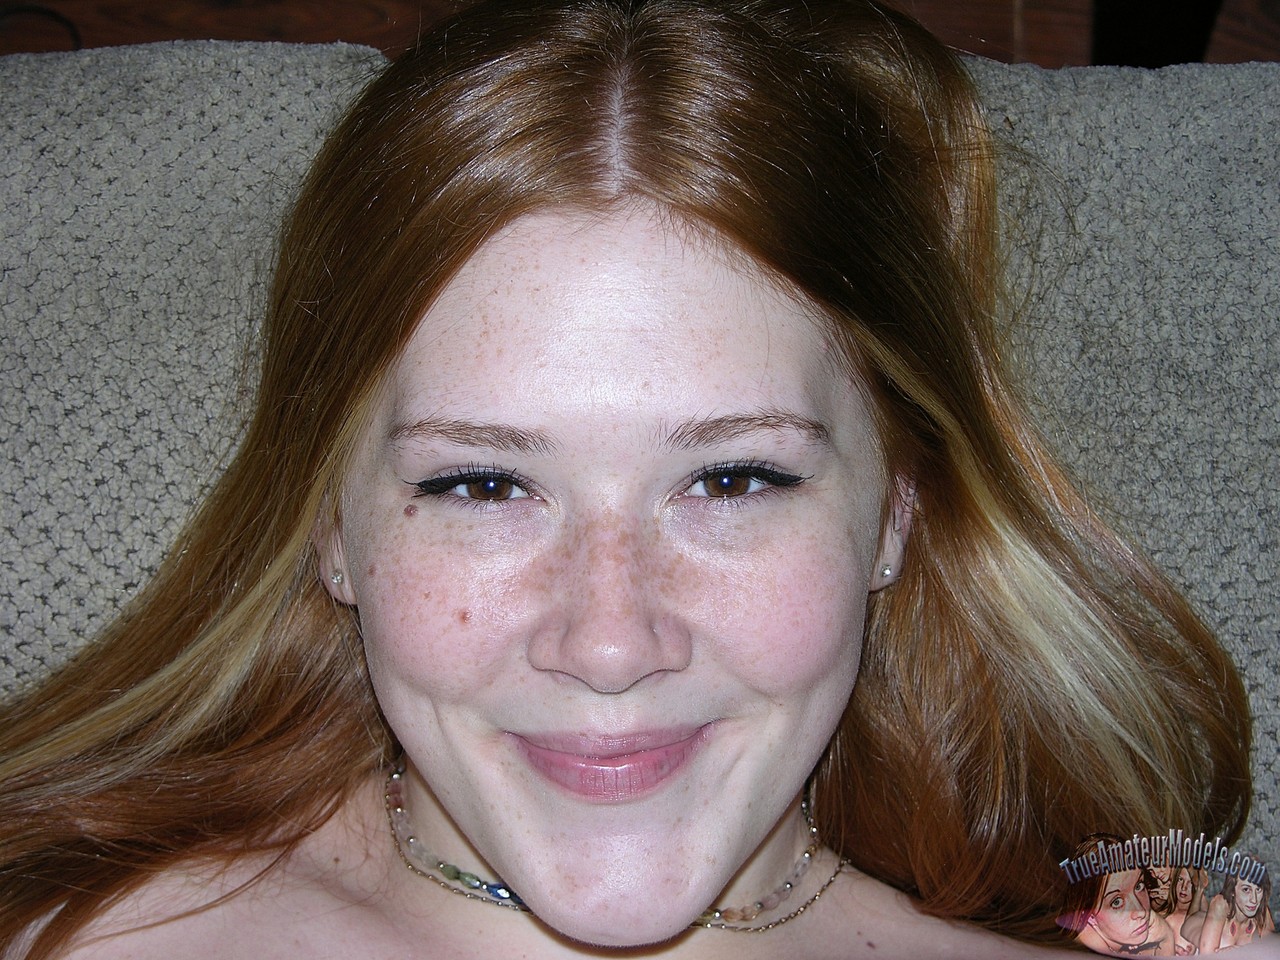 Freckled Face Redhead Amateur Teen Pulling Down Shorts To Expose Butthole photo porno #422855440 | True Amateur Models Pics, Harper R, Face, porno mobile